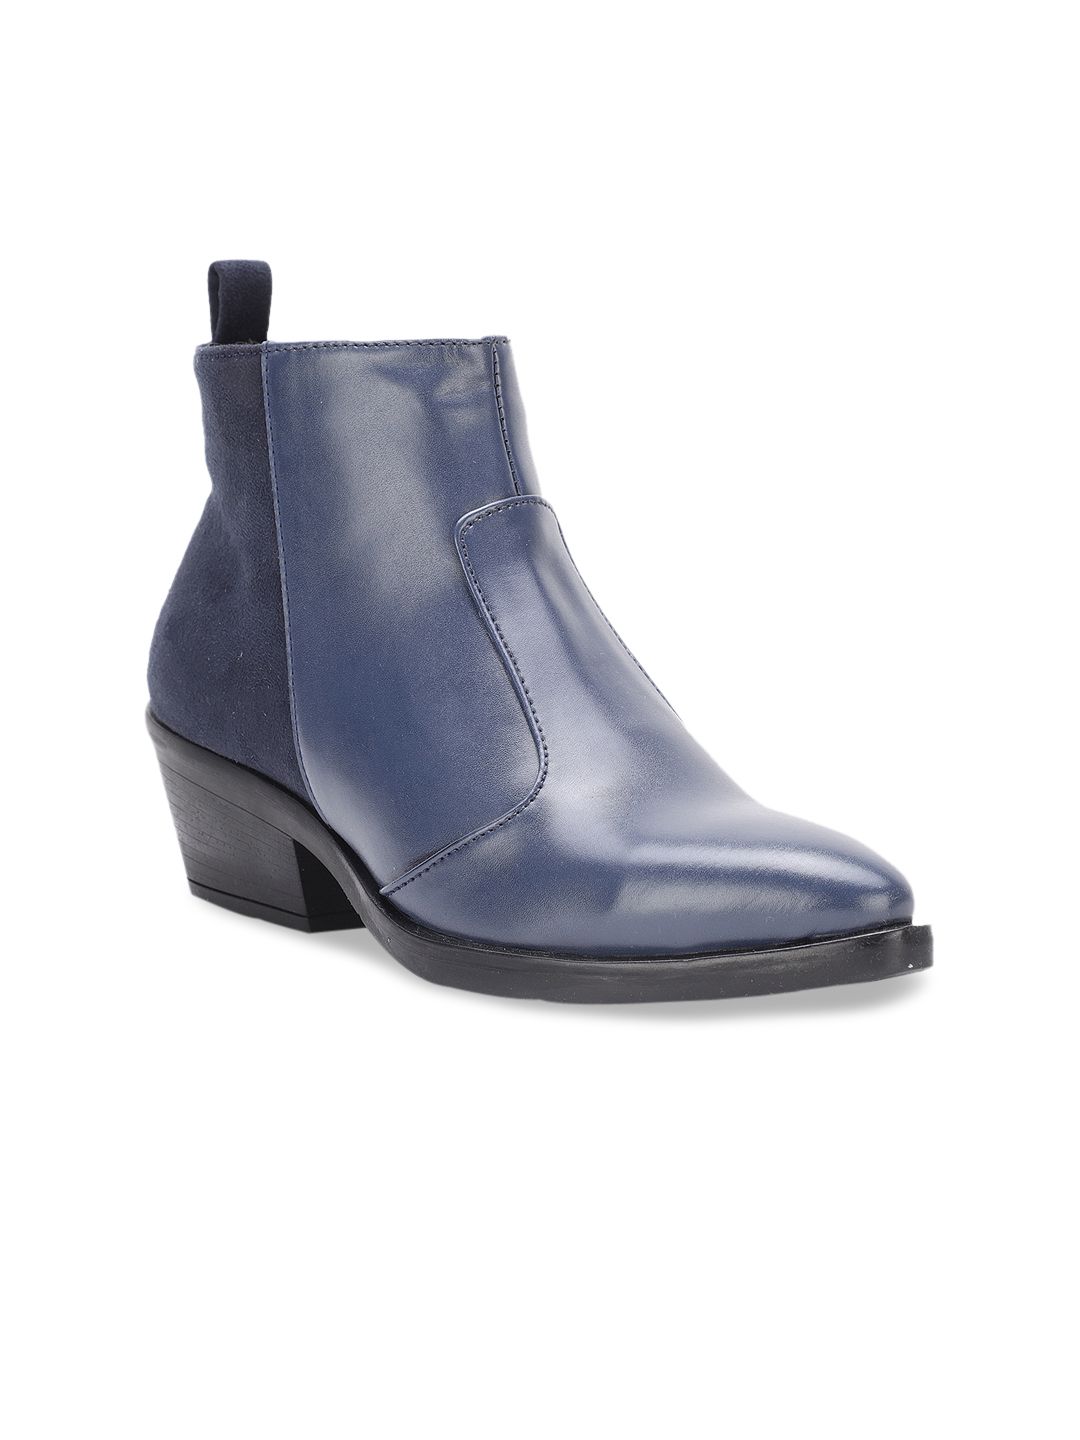 Bruno Manetti Women Blue Solid Heeled Boots Price in India